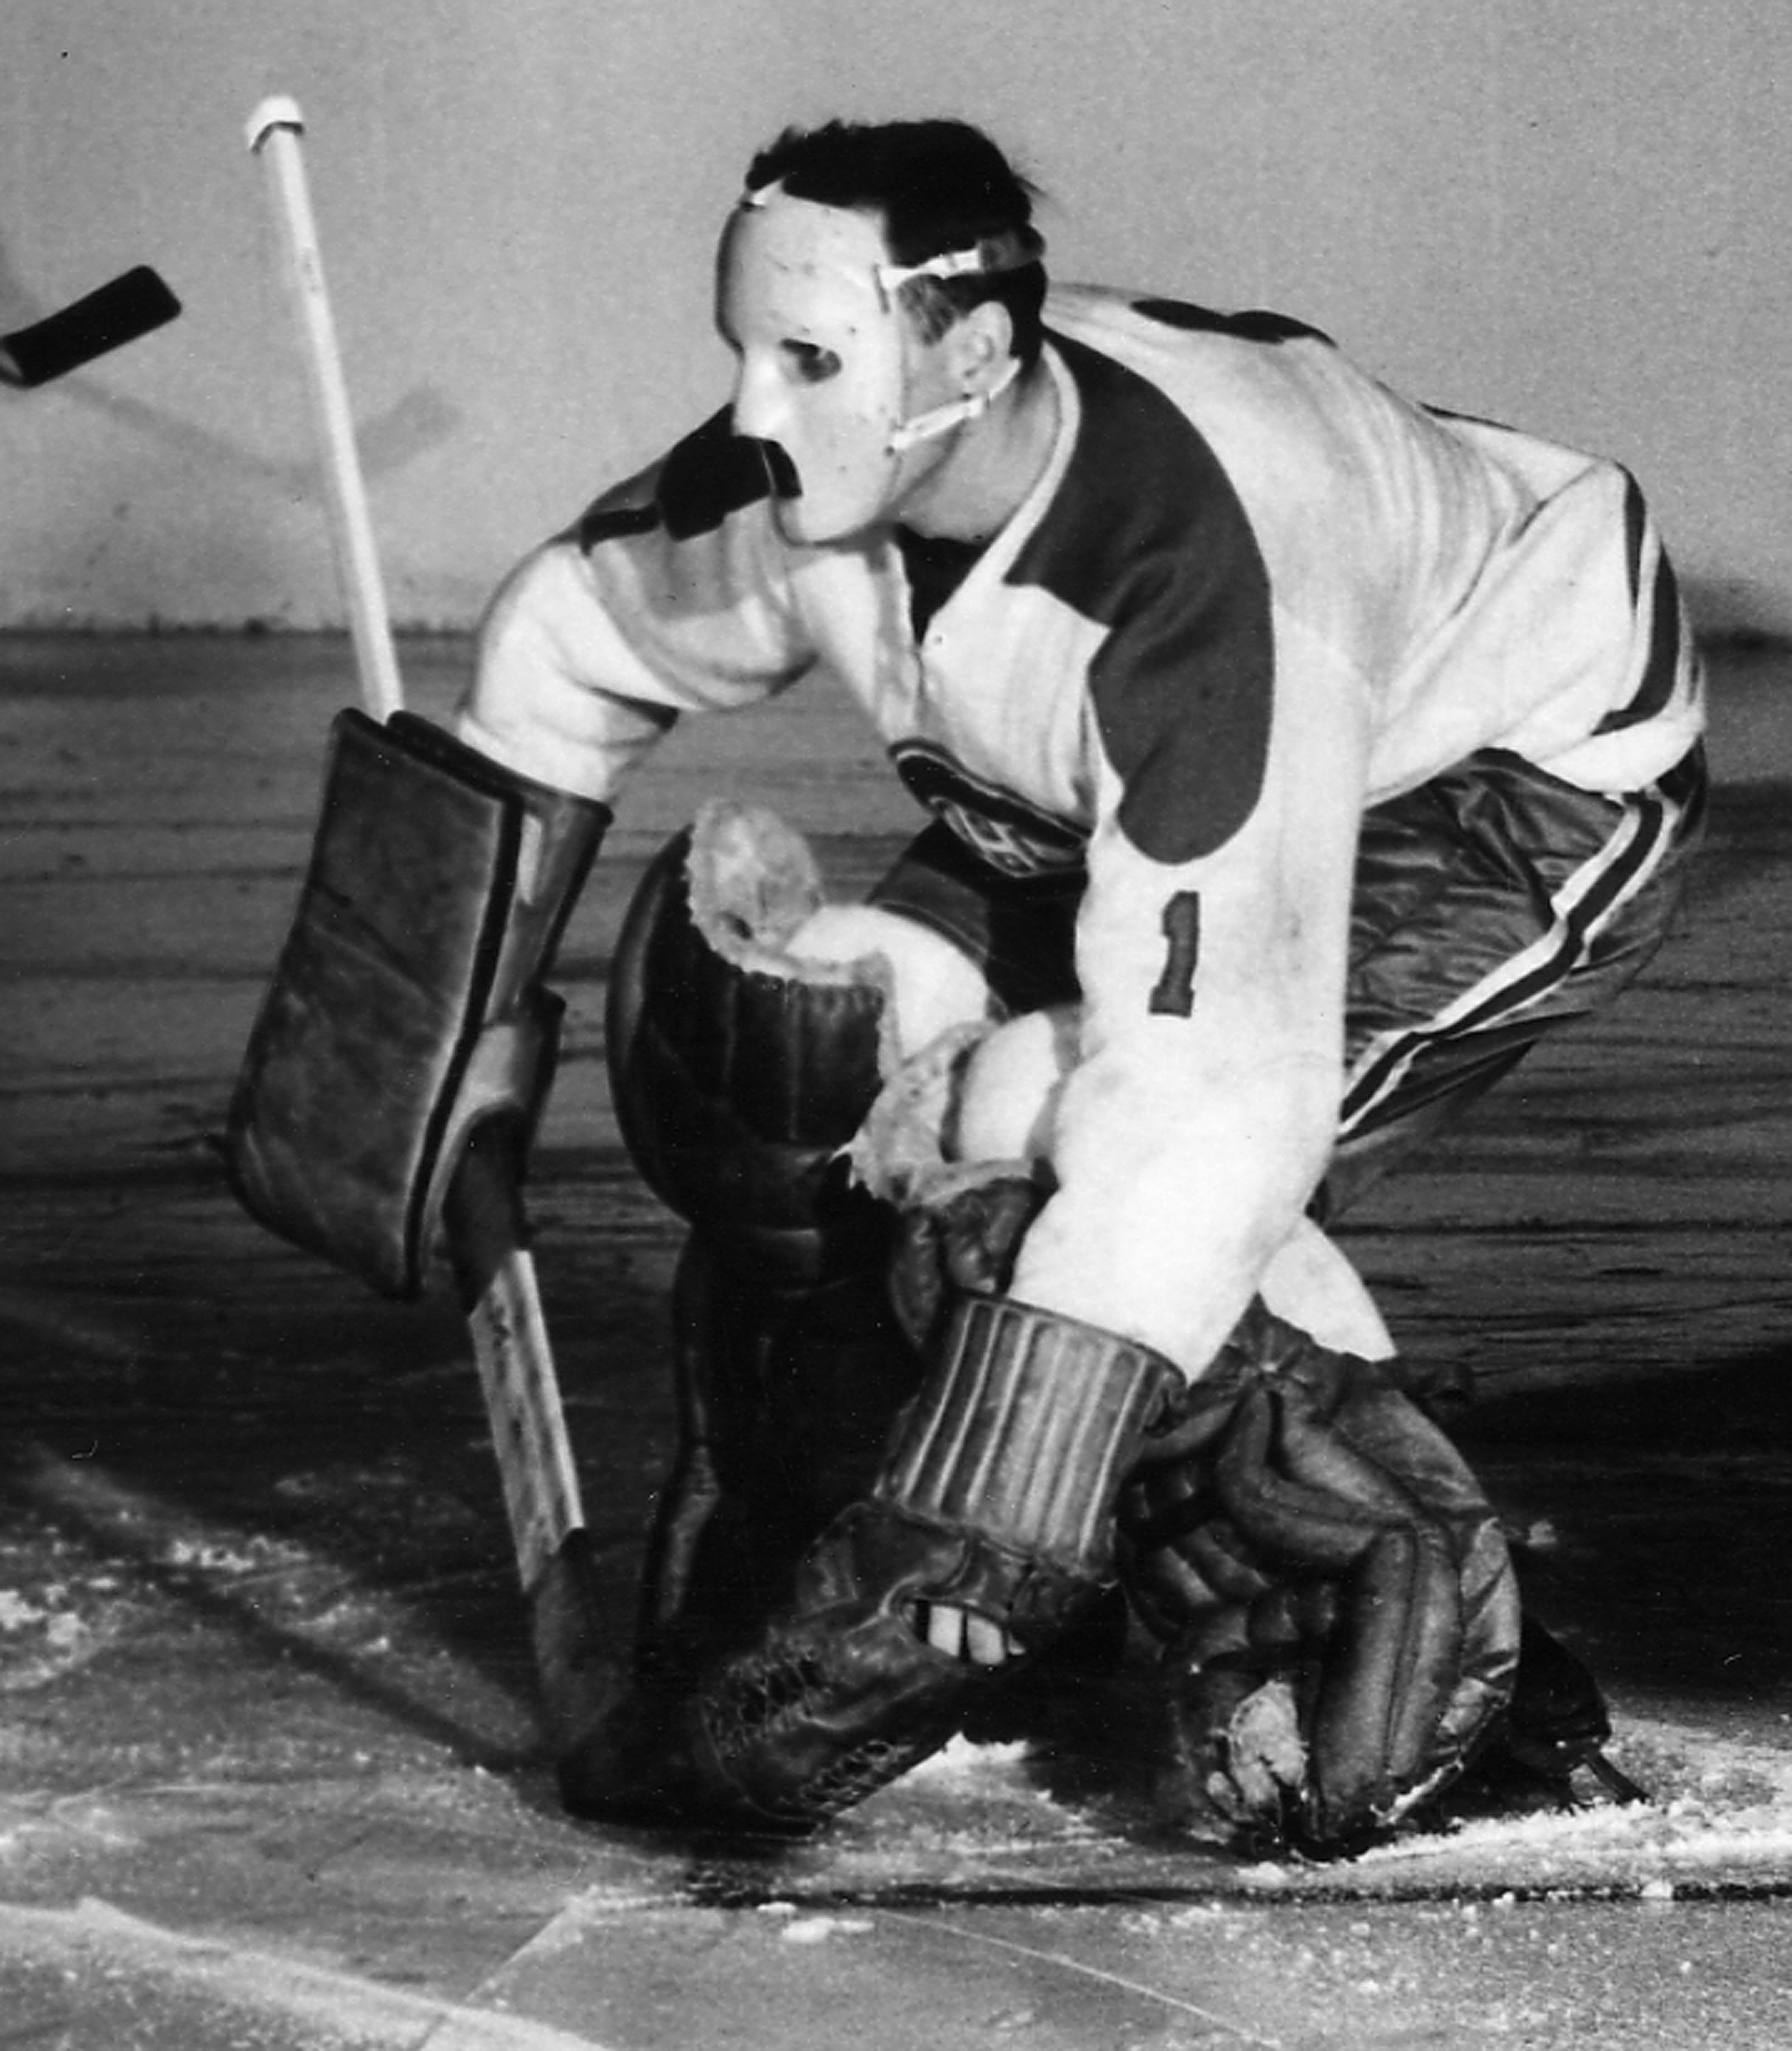 Jacques Plante squatting down in front of the goalie net in 1959 wearing his mask during a game against the Toronto Maple Leafs at Madison Square Garden.